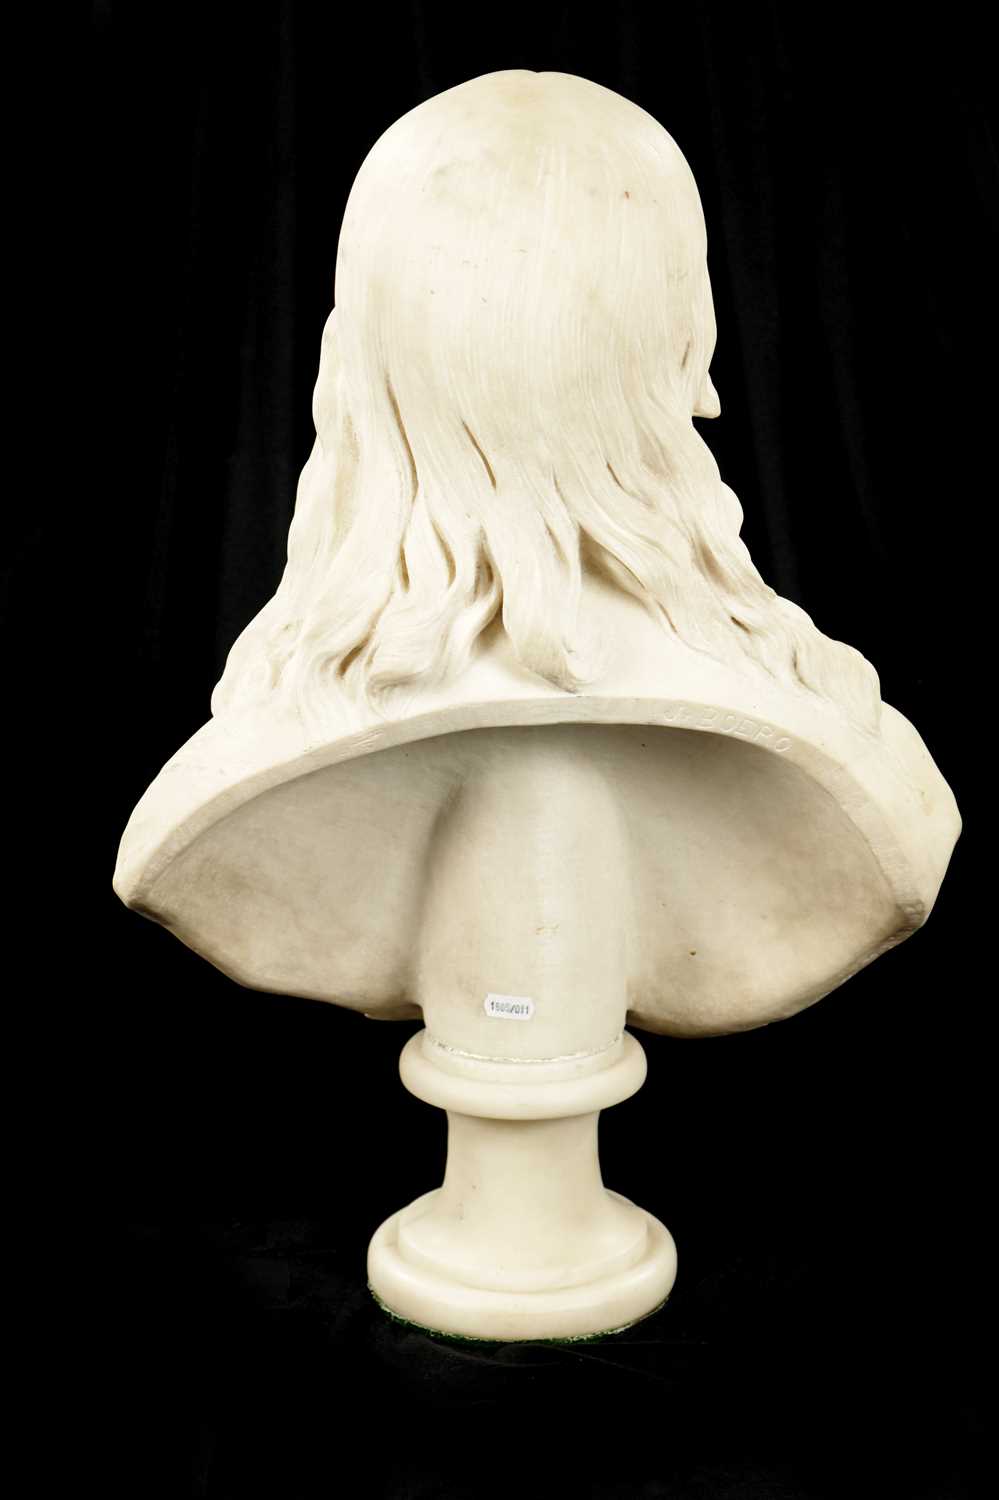 JACQUES BOERO. A 19TH CENTURY CARVED CARRERA MARBLE ITALIAN BUST - Image 4 of 5